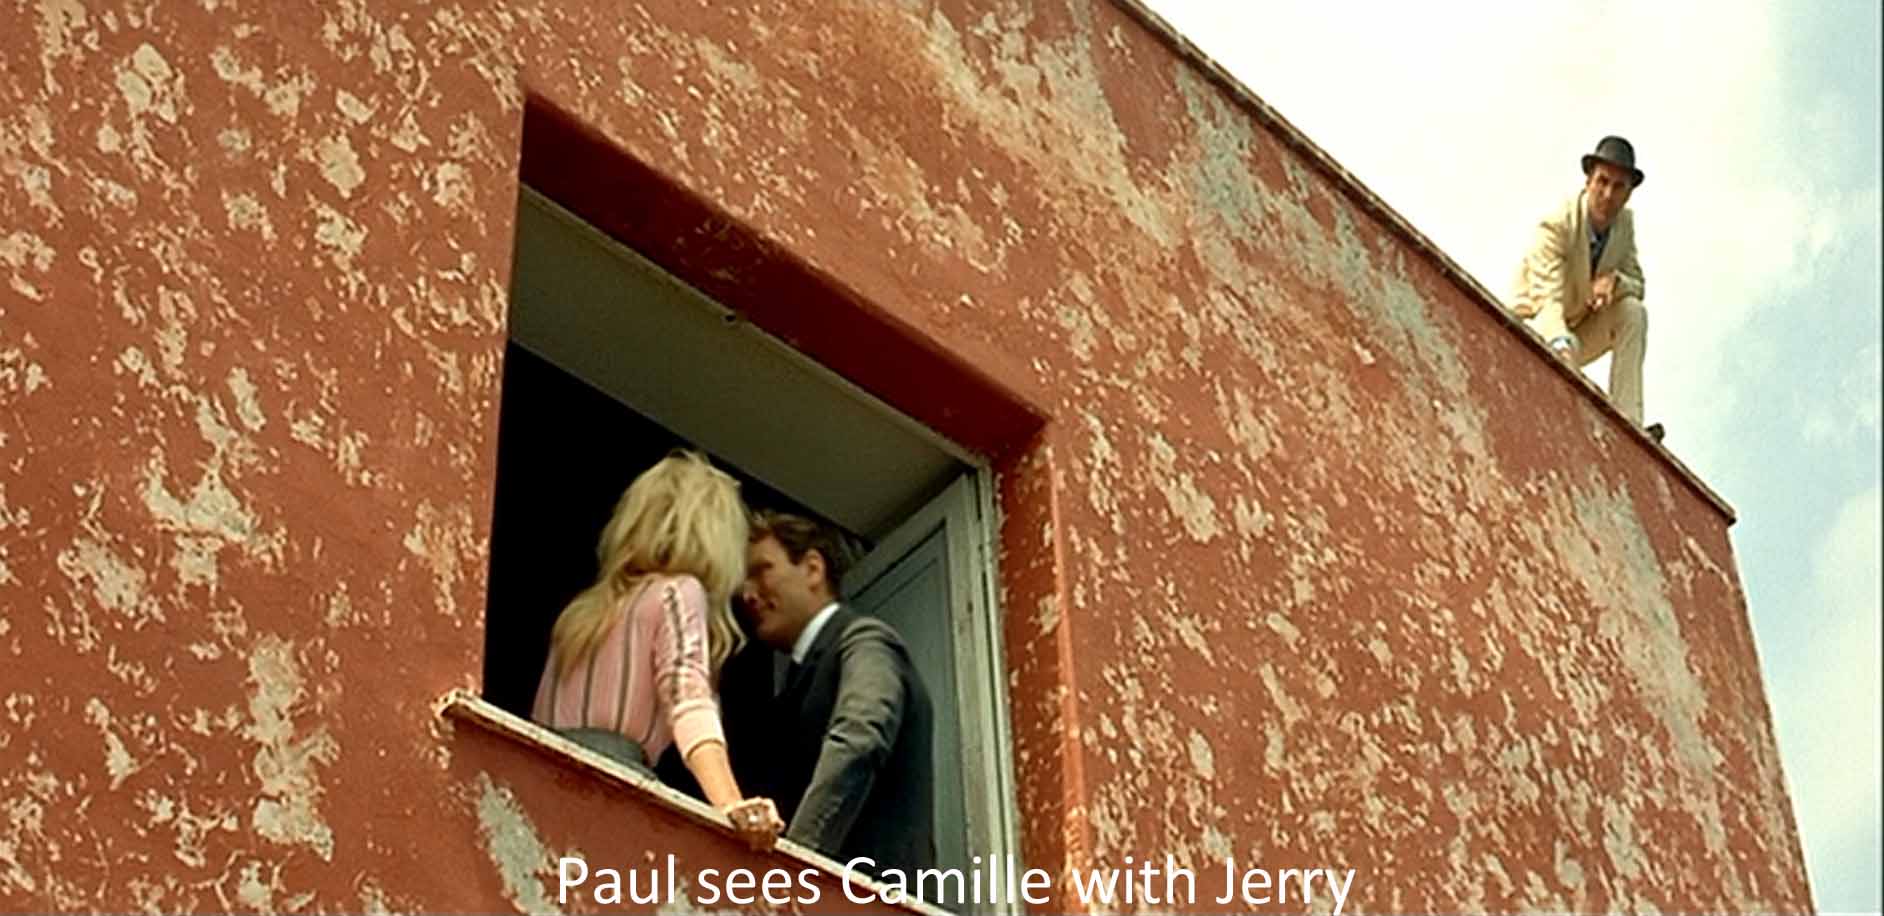 Paul sees Camille with Jerry